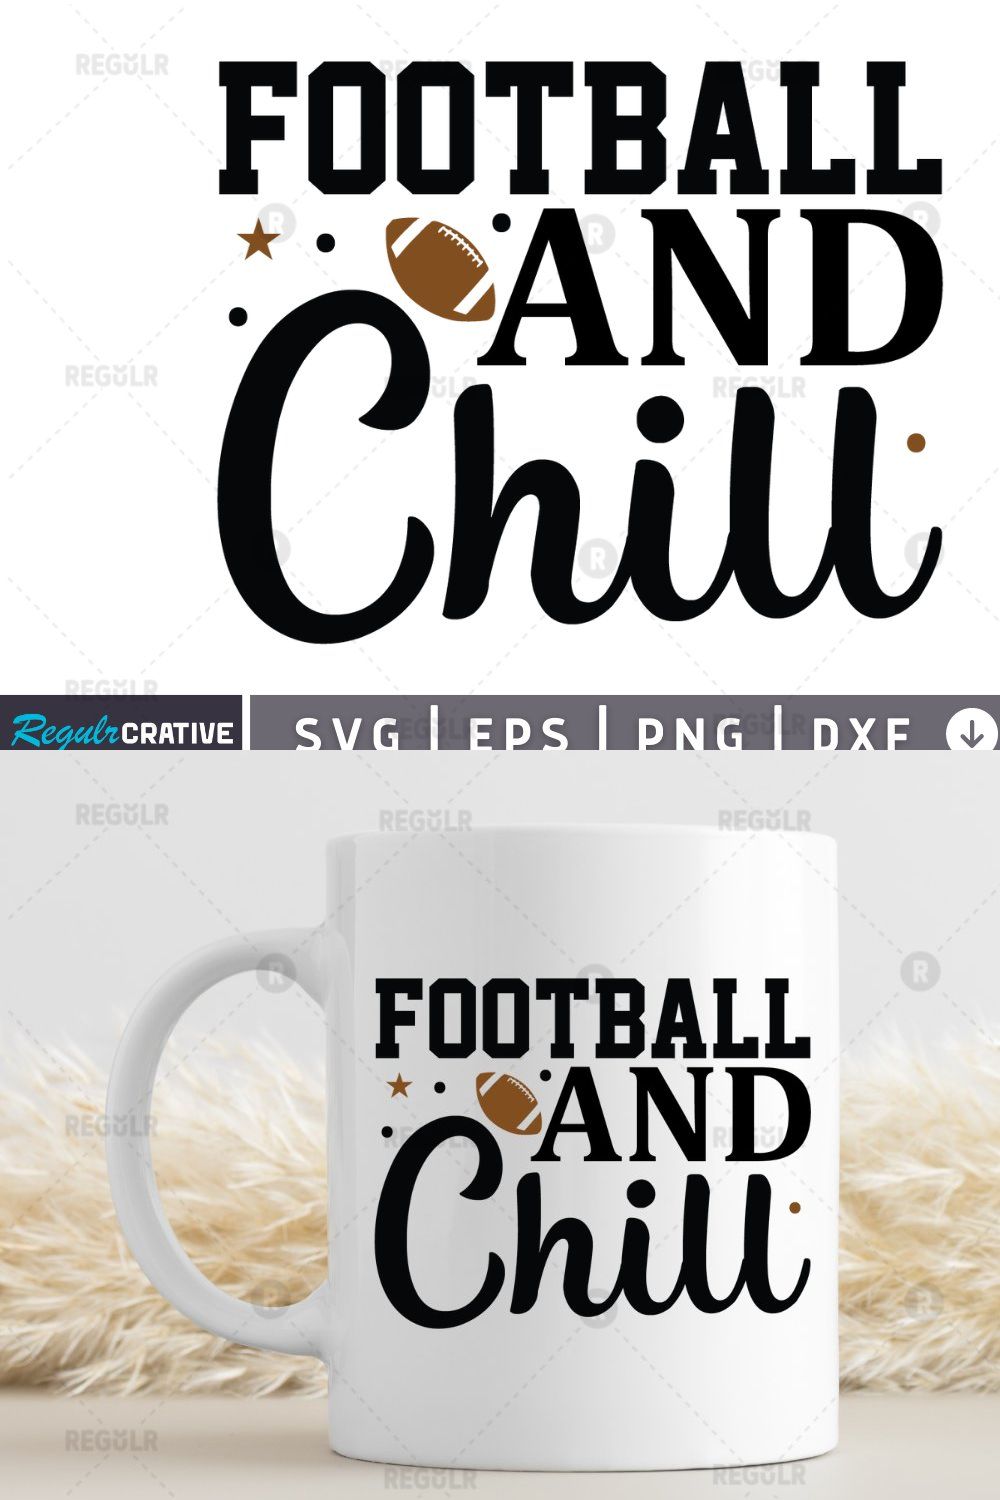 football and chill SVG pinterest preview image.